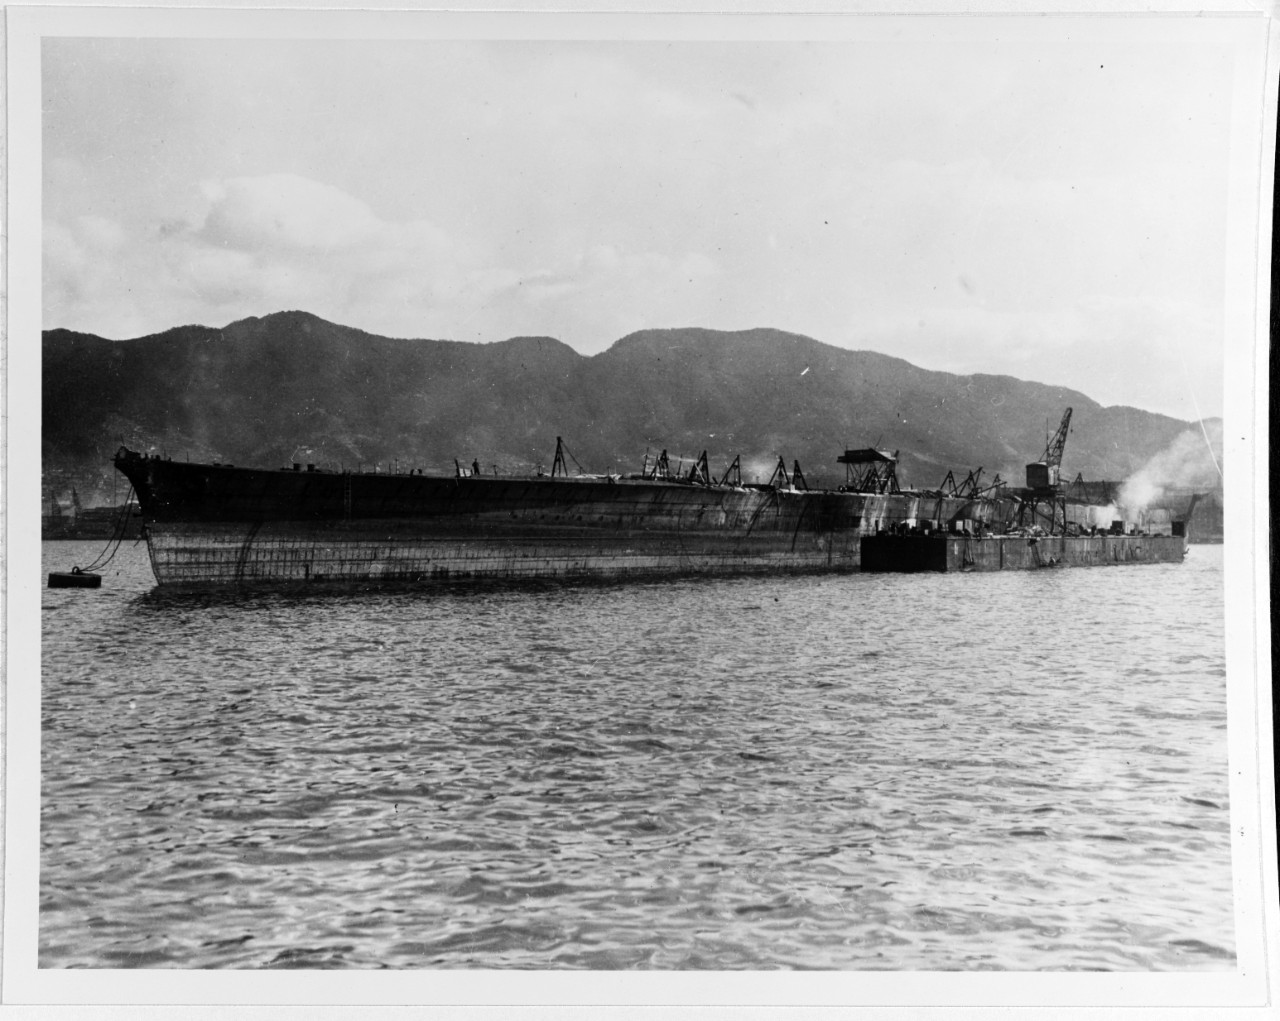 ASO (Japanese aircraft carrier, 1944-47)